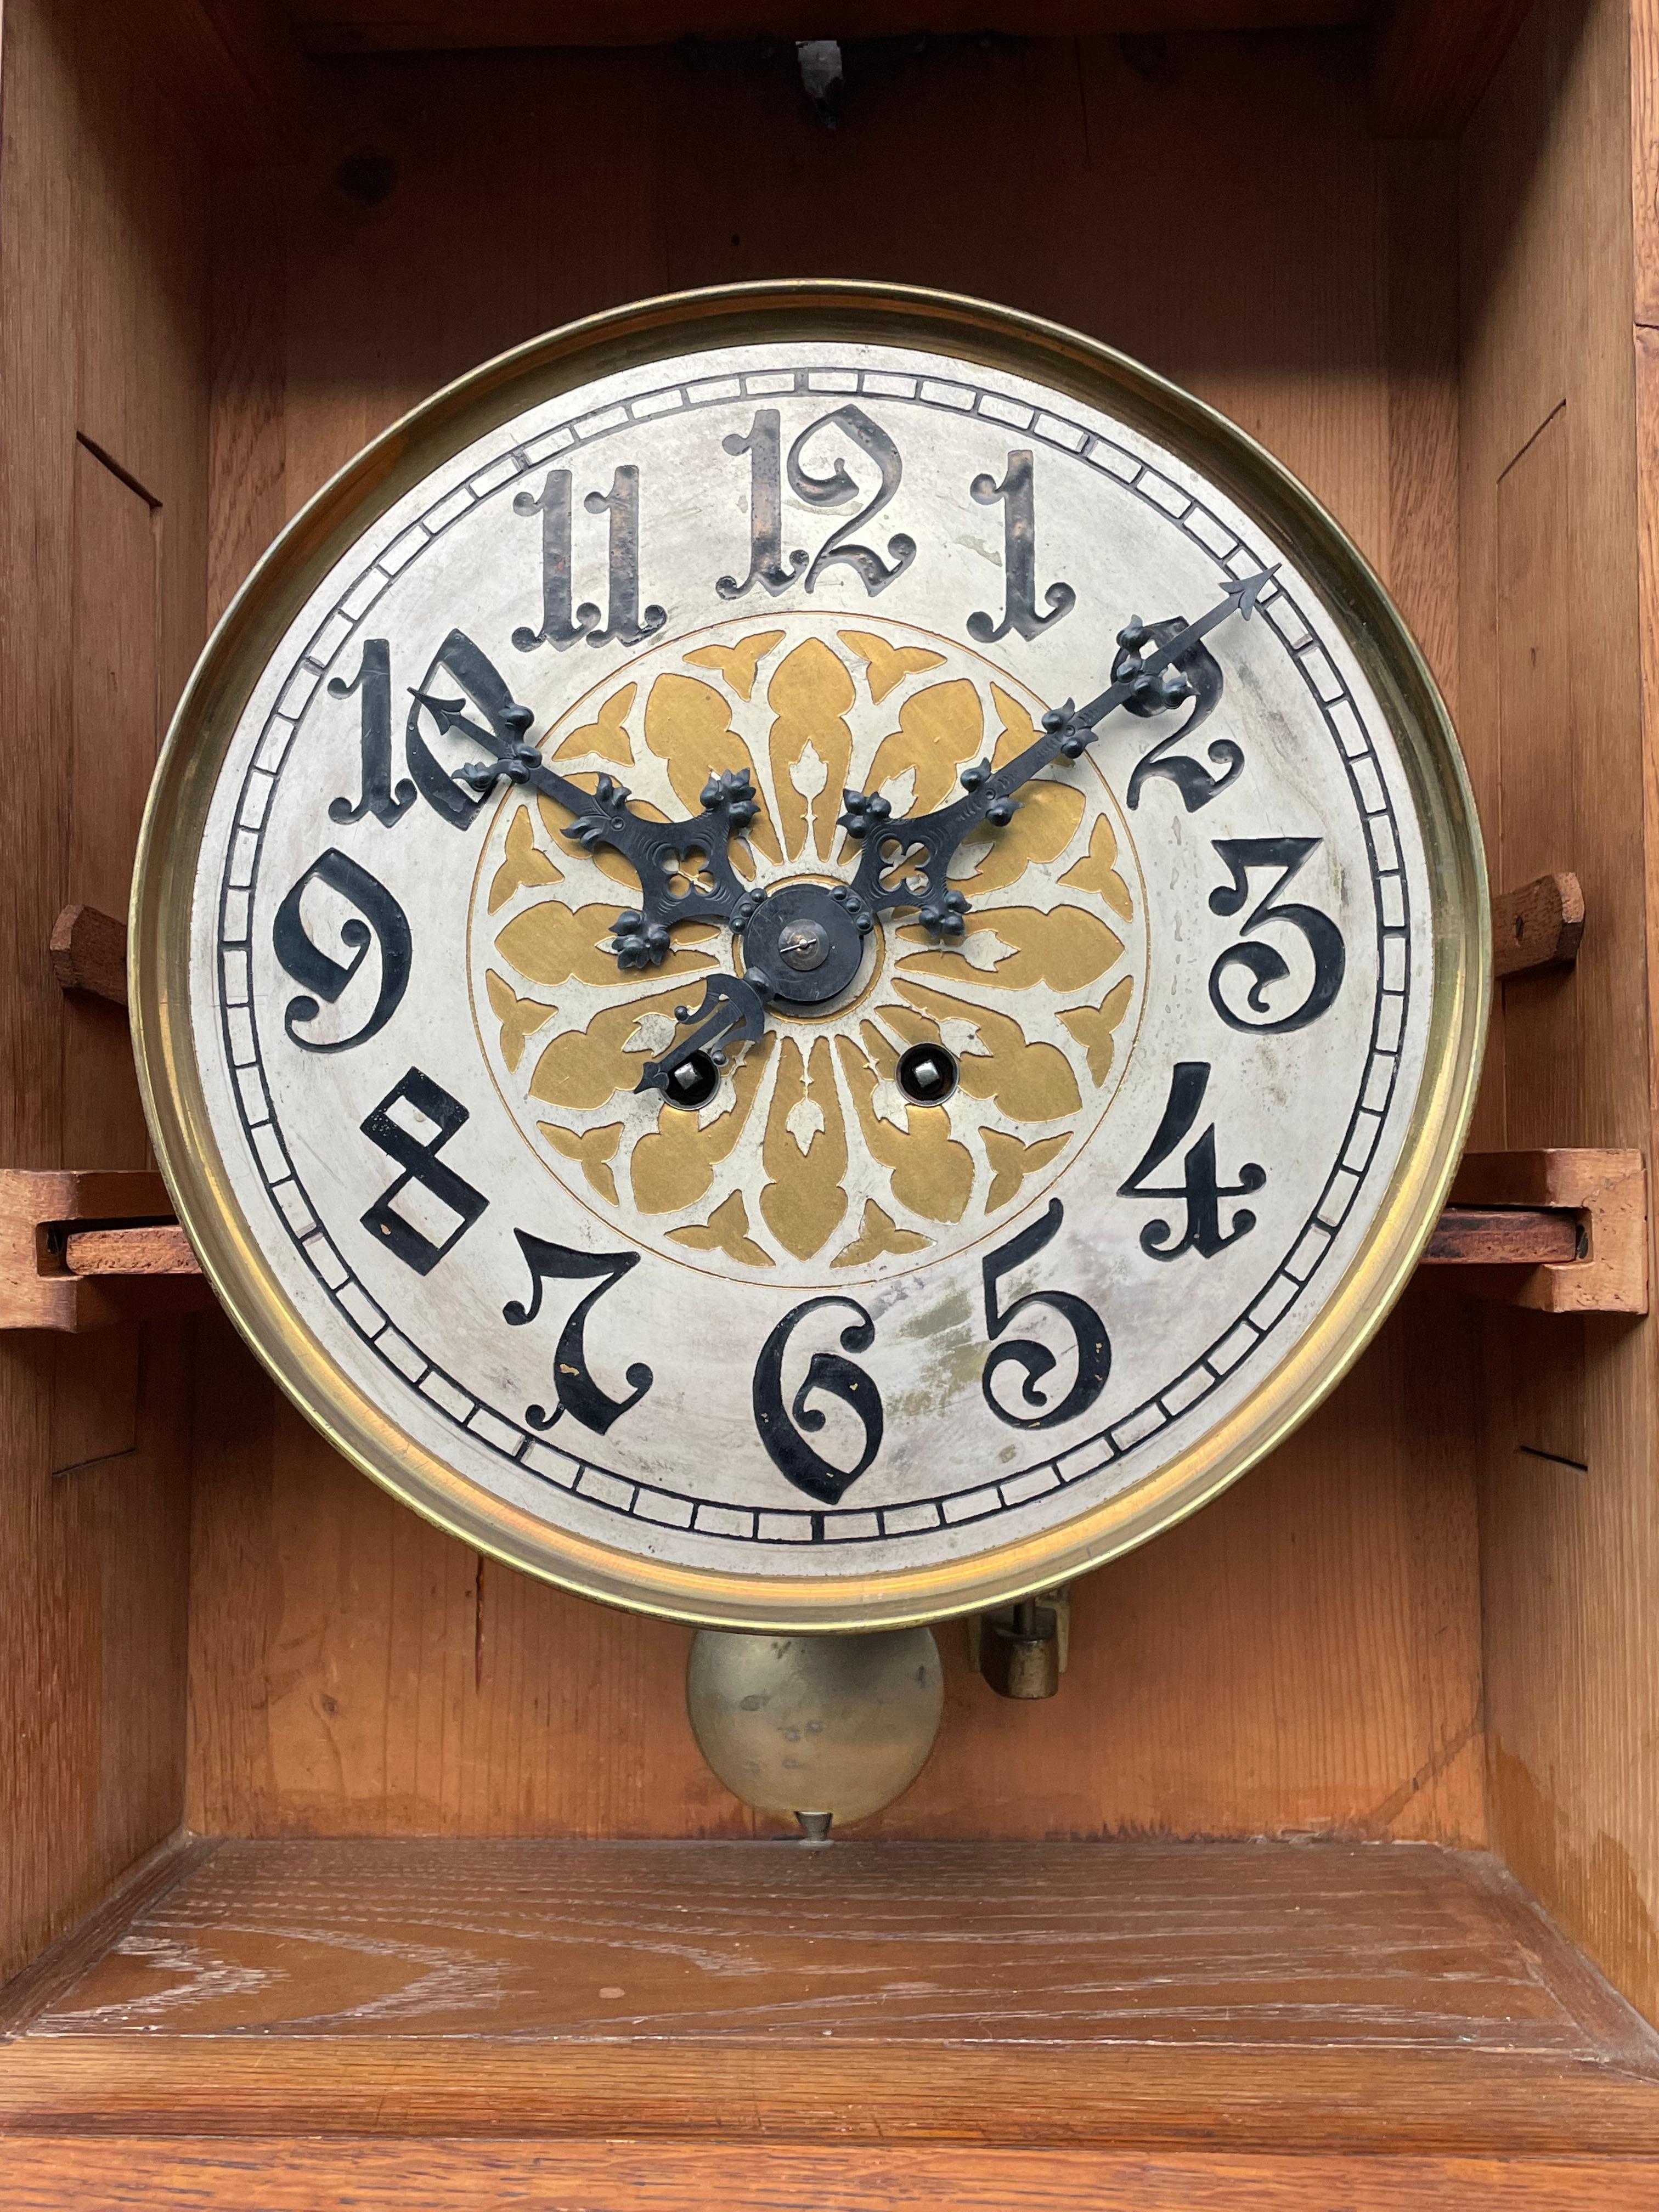 Rare & Large Antique Hand Carved Gothic Revival Wall Clock w. Lenzkirch Movement 5